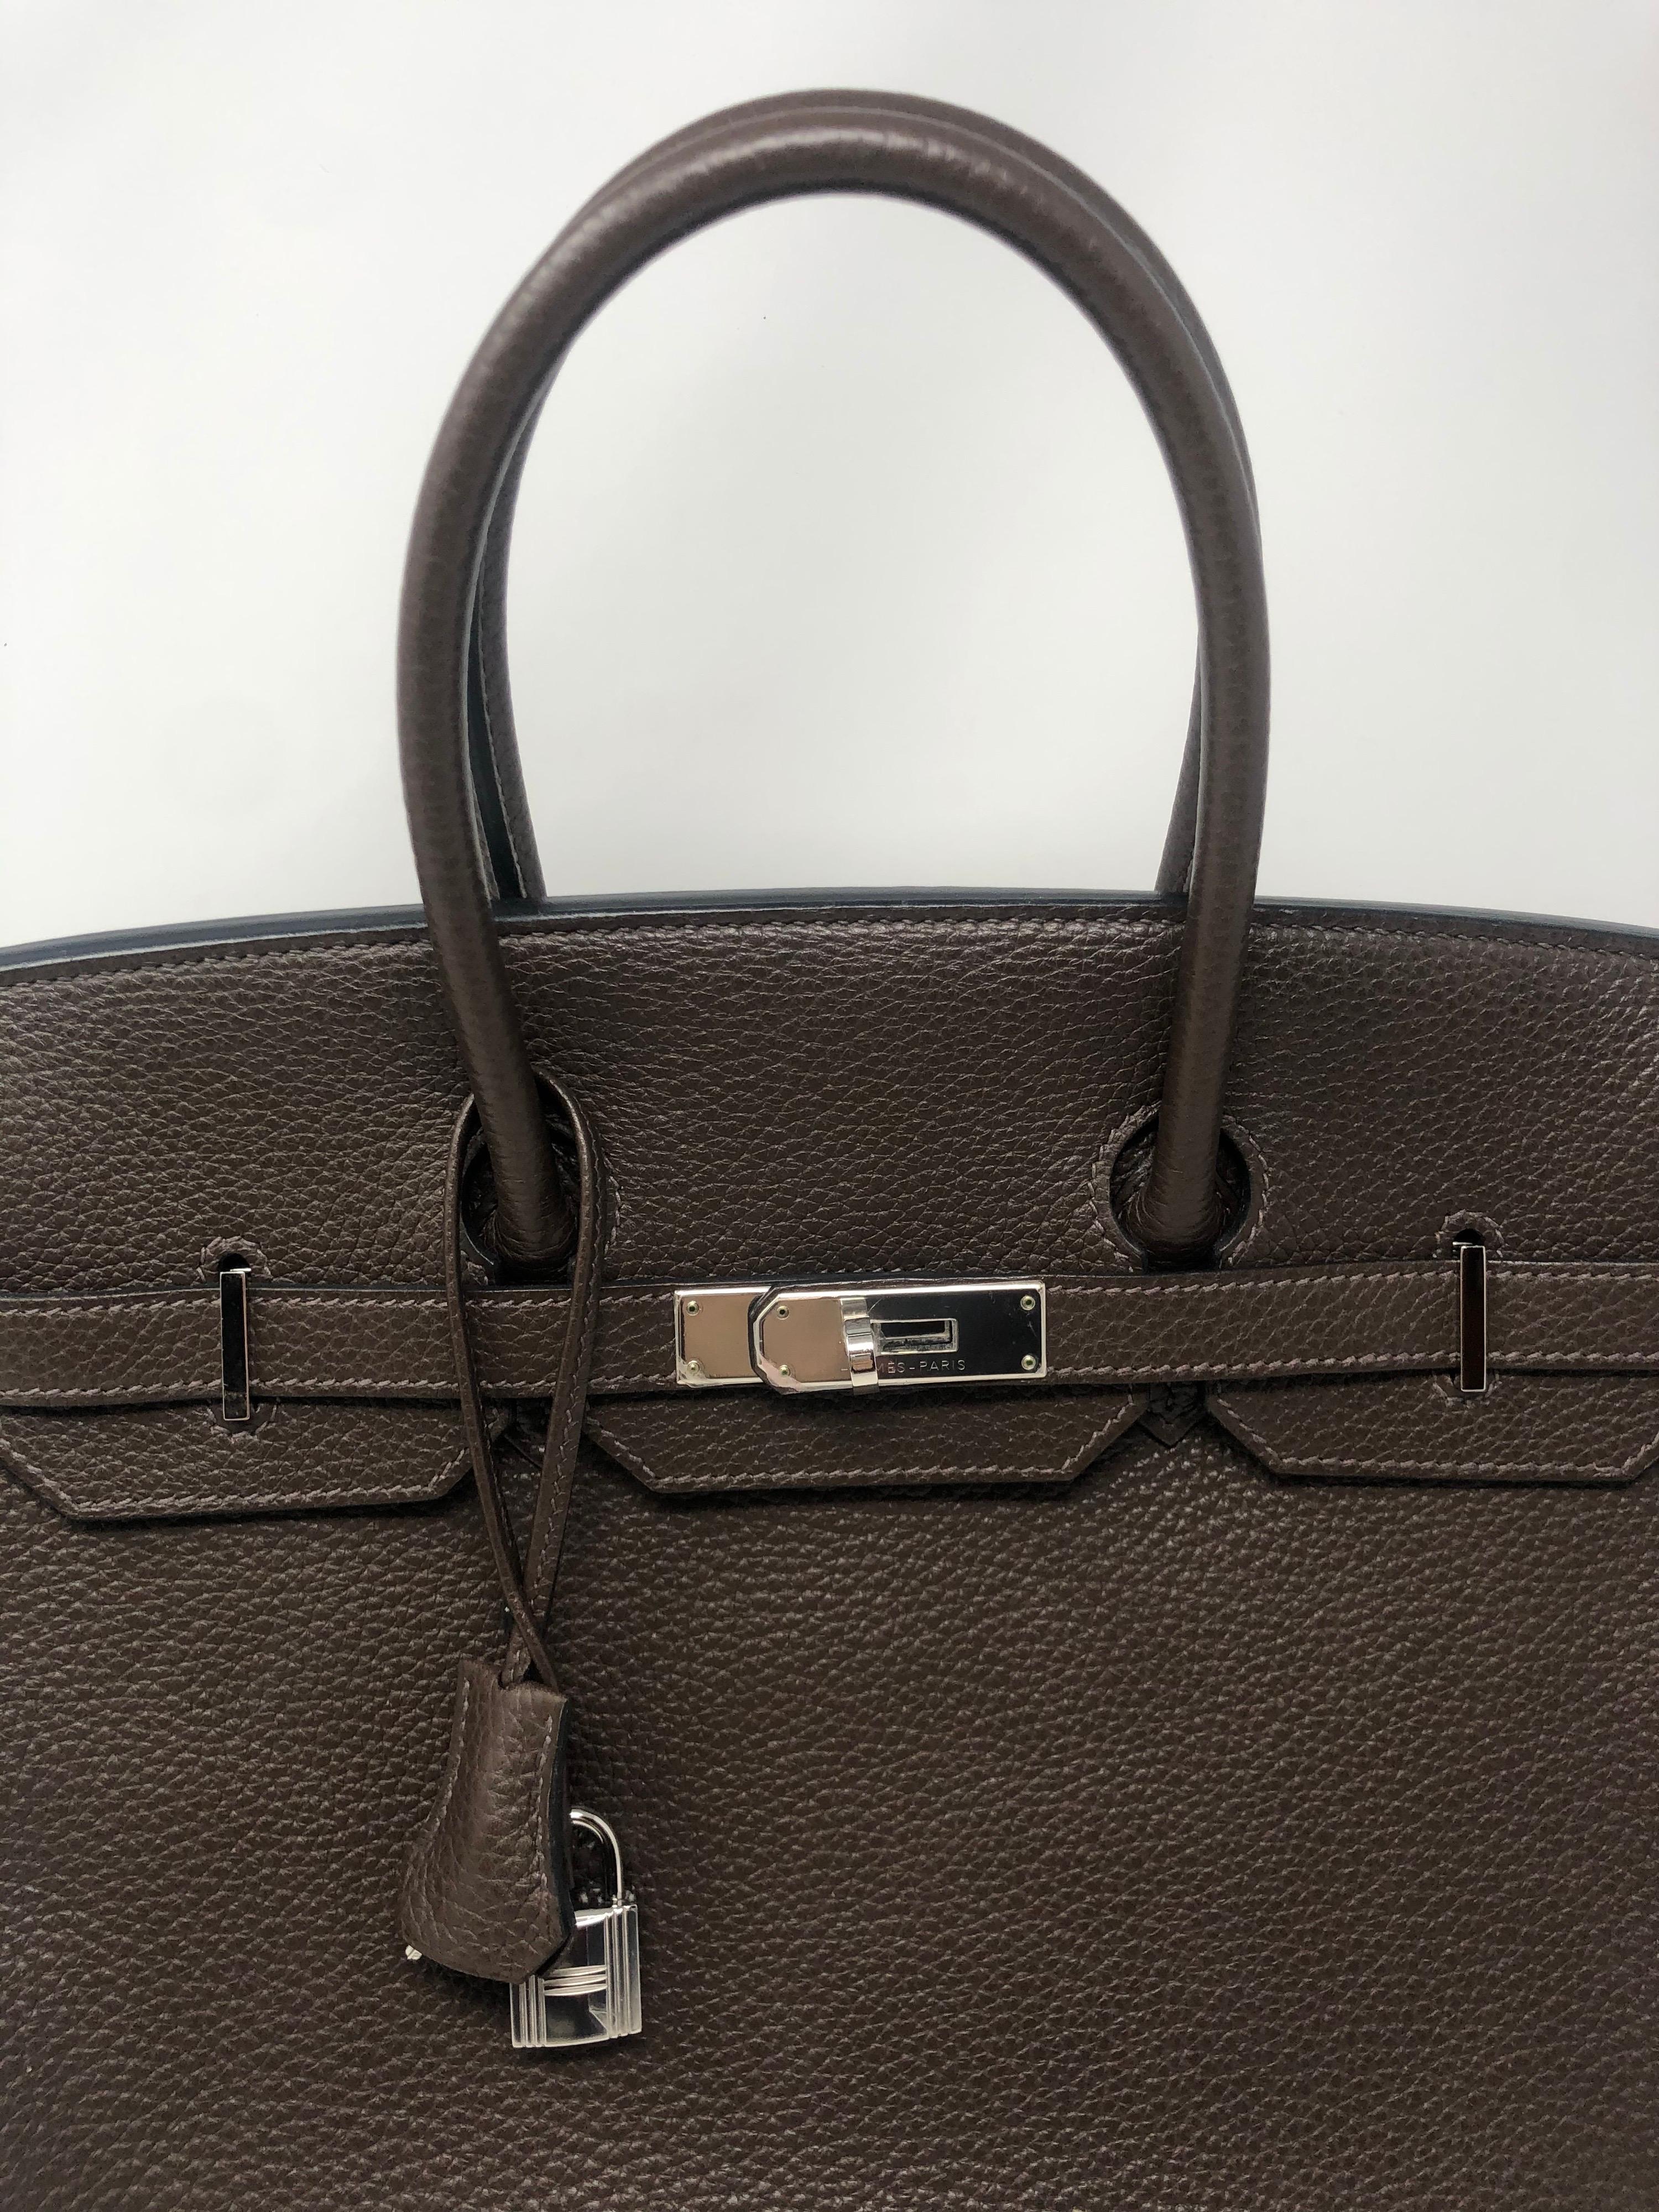 Hermes Birkin 35 Cafe Bag. Beautiful brown leather Birkin. Palladium hardware. Excellent condition. Comes with original receipt. From 2015. Looks brand new. Full set. Includes clochette, lock, keys, dust cover and box. Guaranteed authentic. 